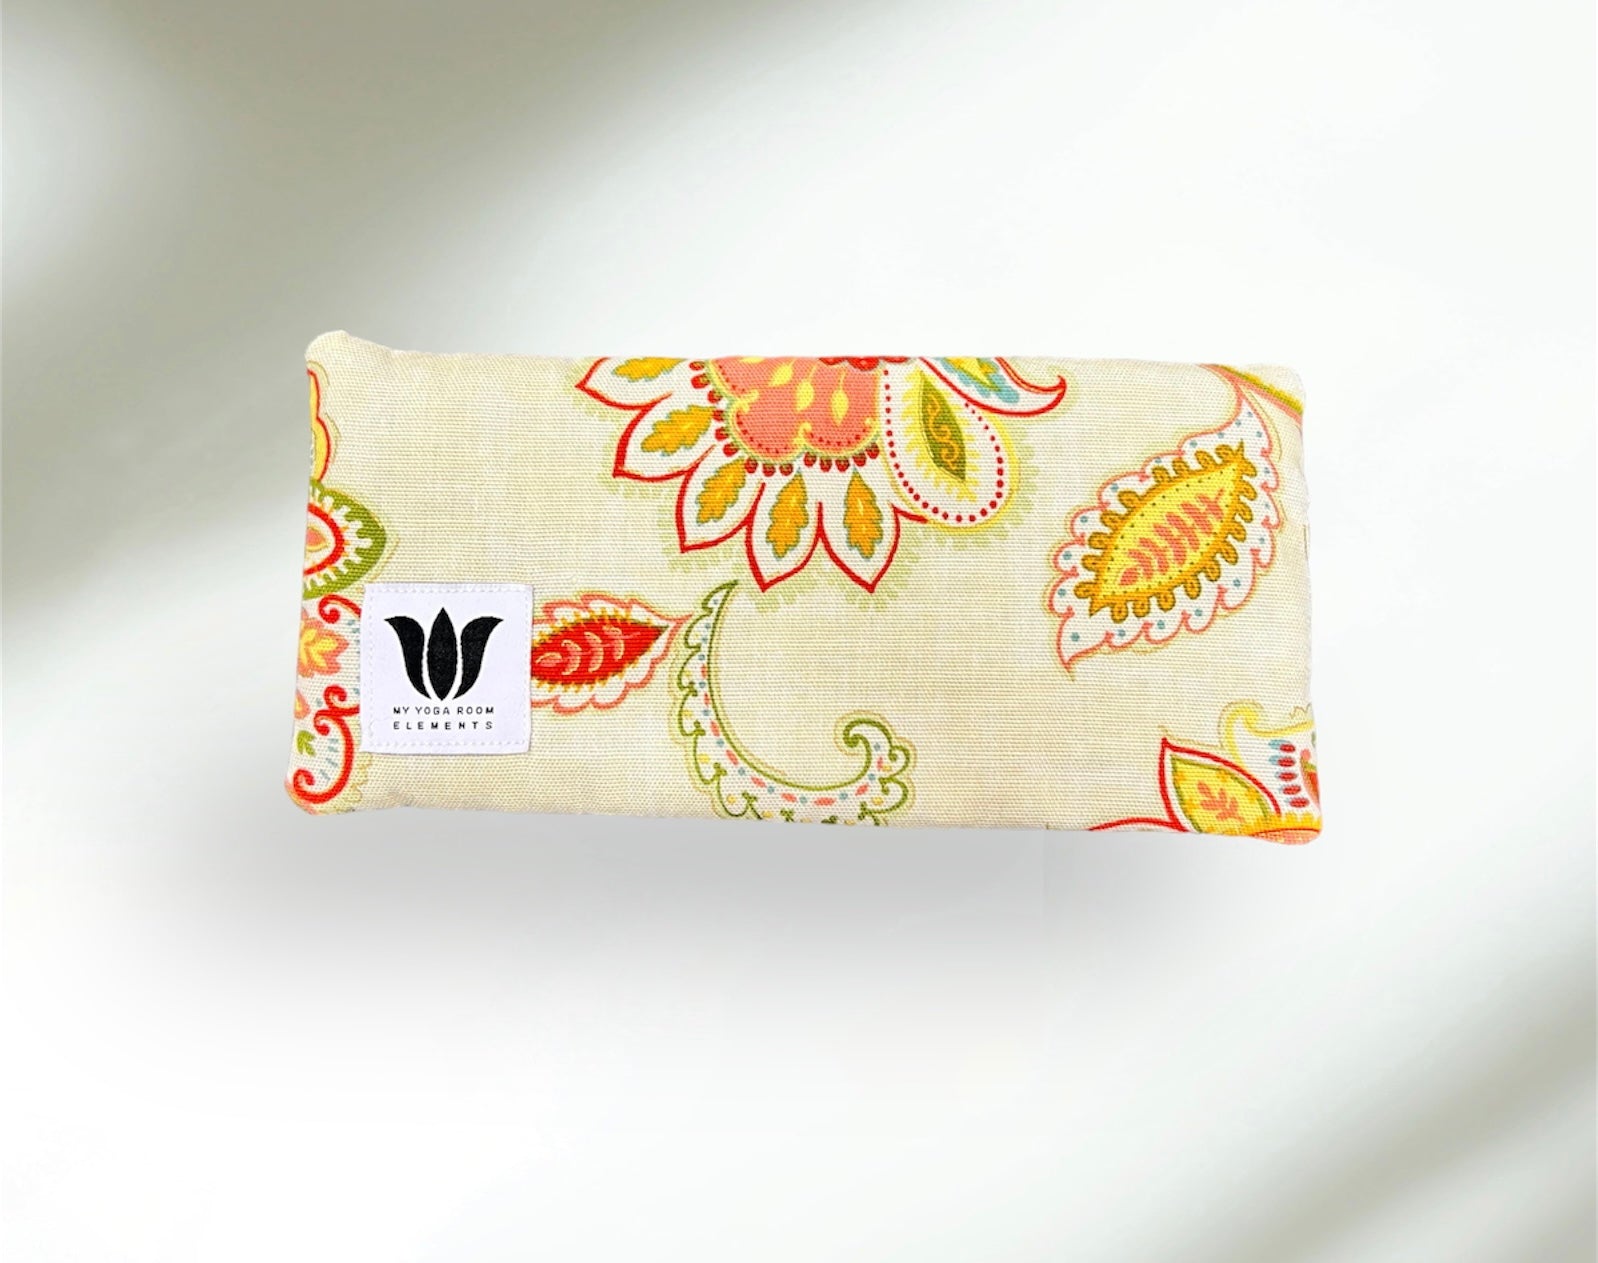 Bright Citrus Floral Print Luxury Eye Pillow with soft bamboo fabric backing, Made in Canada by My Yoga Room Elements.